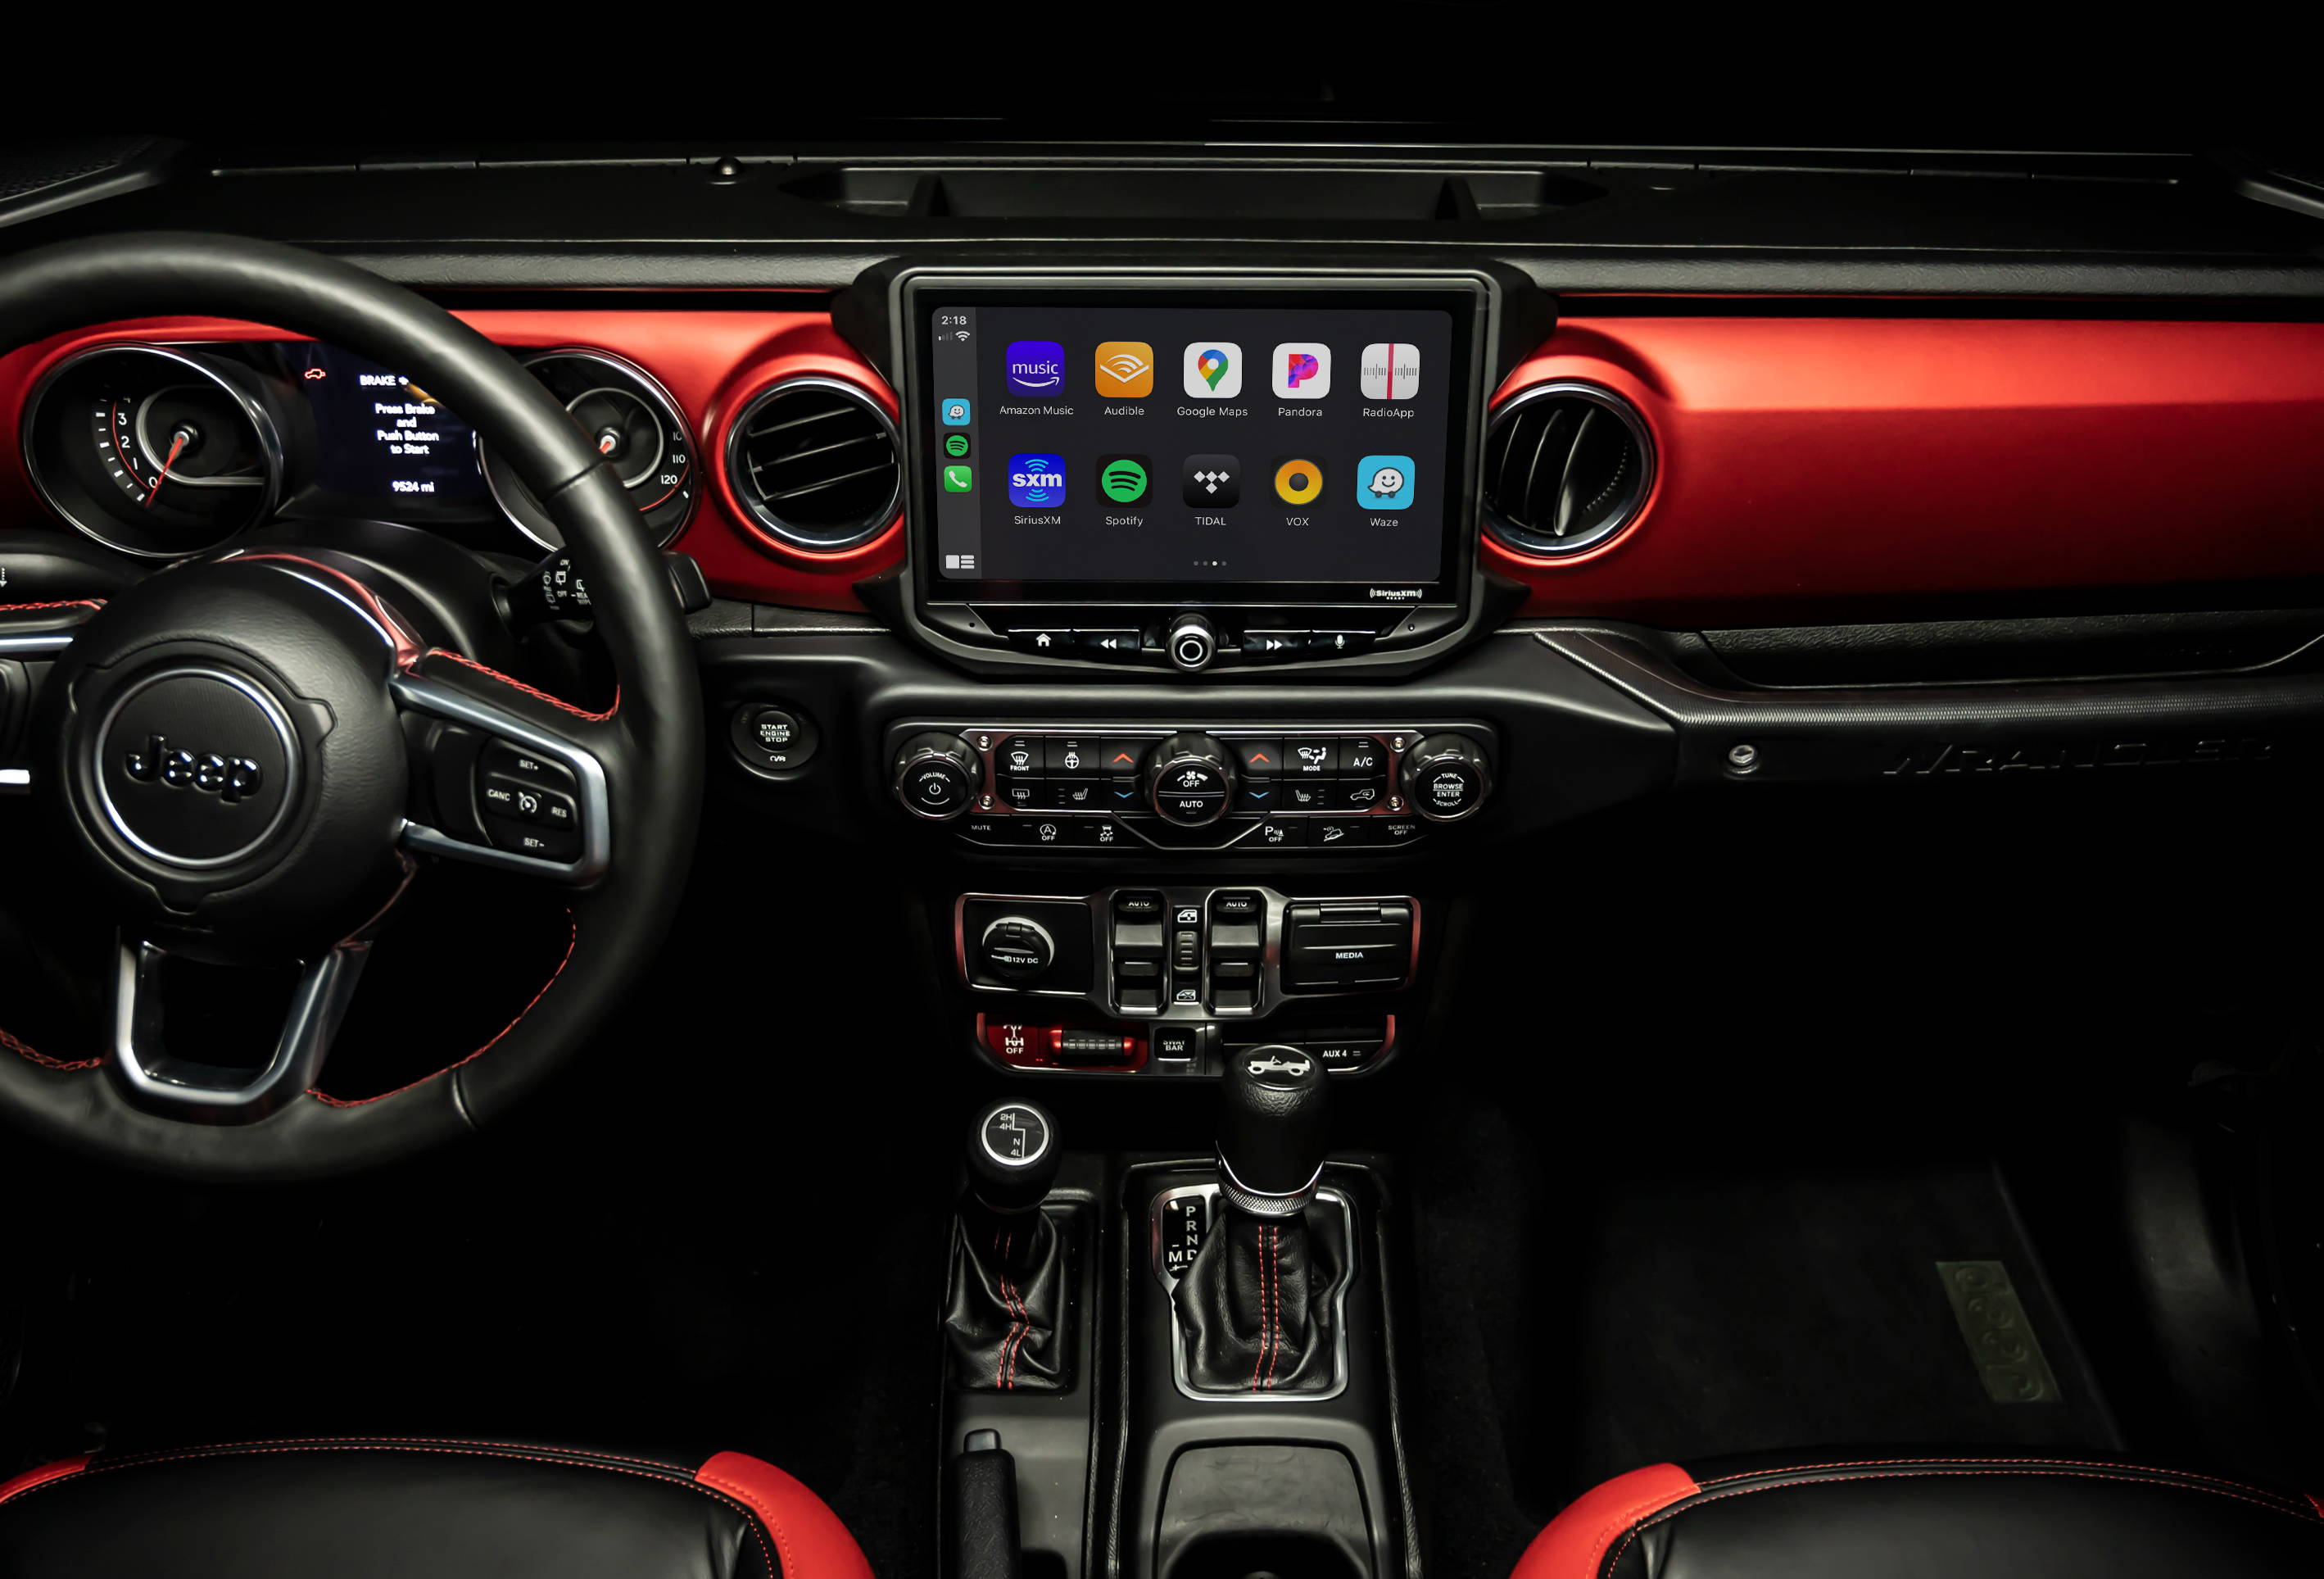 Jeep Wrangler Featuring Apple CarPlay and Android Auto